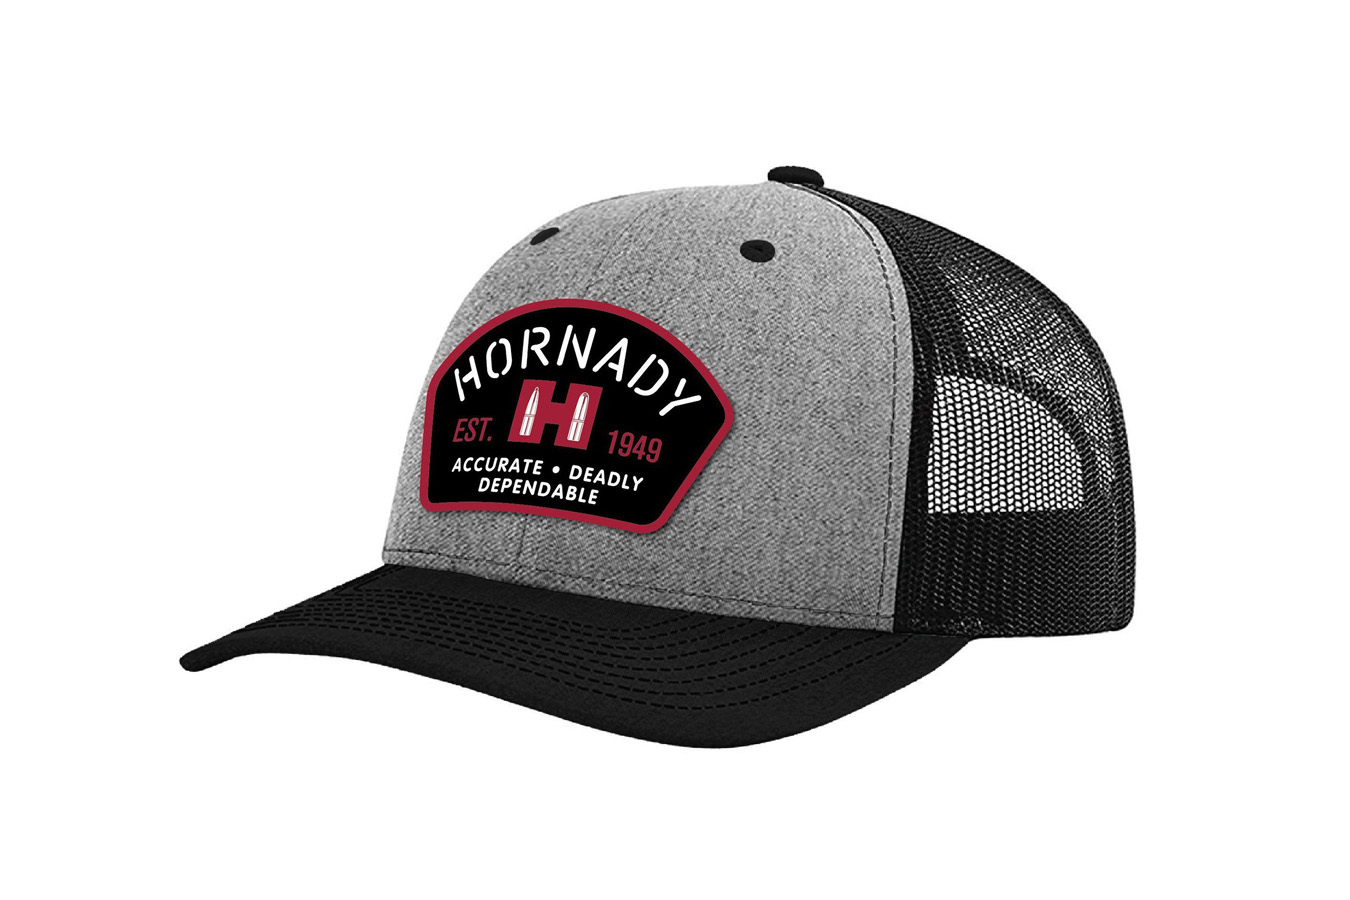 Shop Hornadygear Accurate & Dependable Trucker Hat for Sale | Online ...